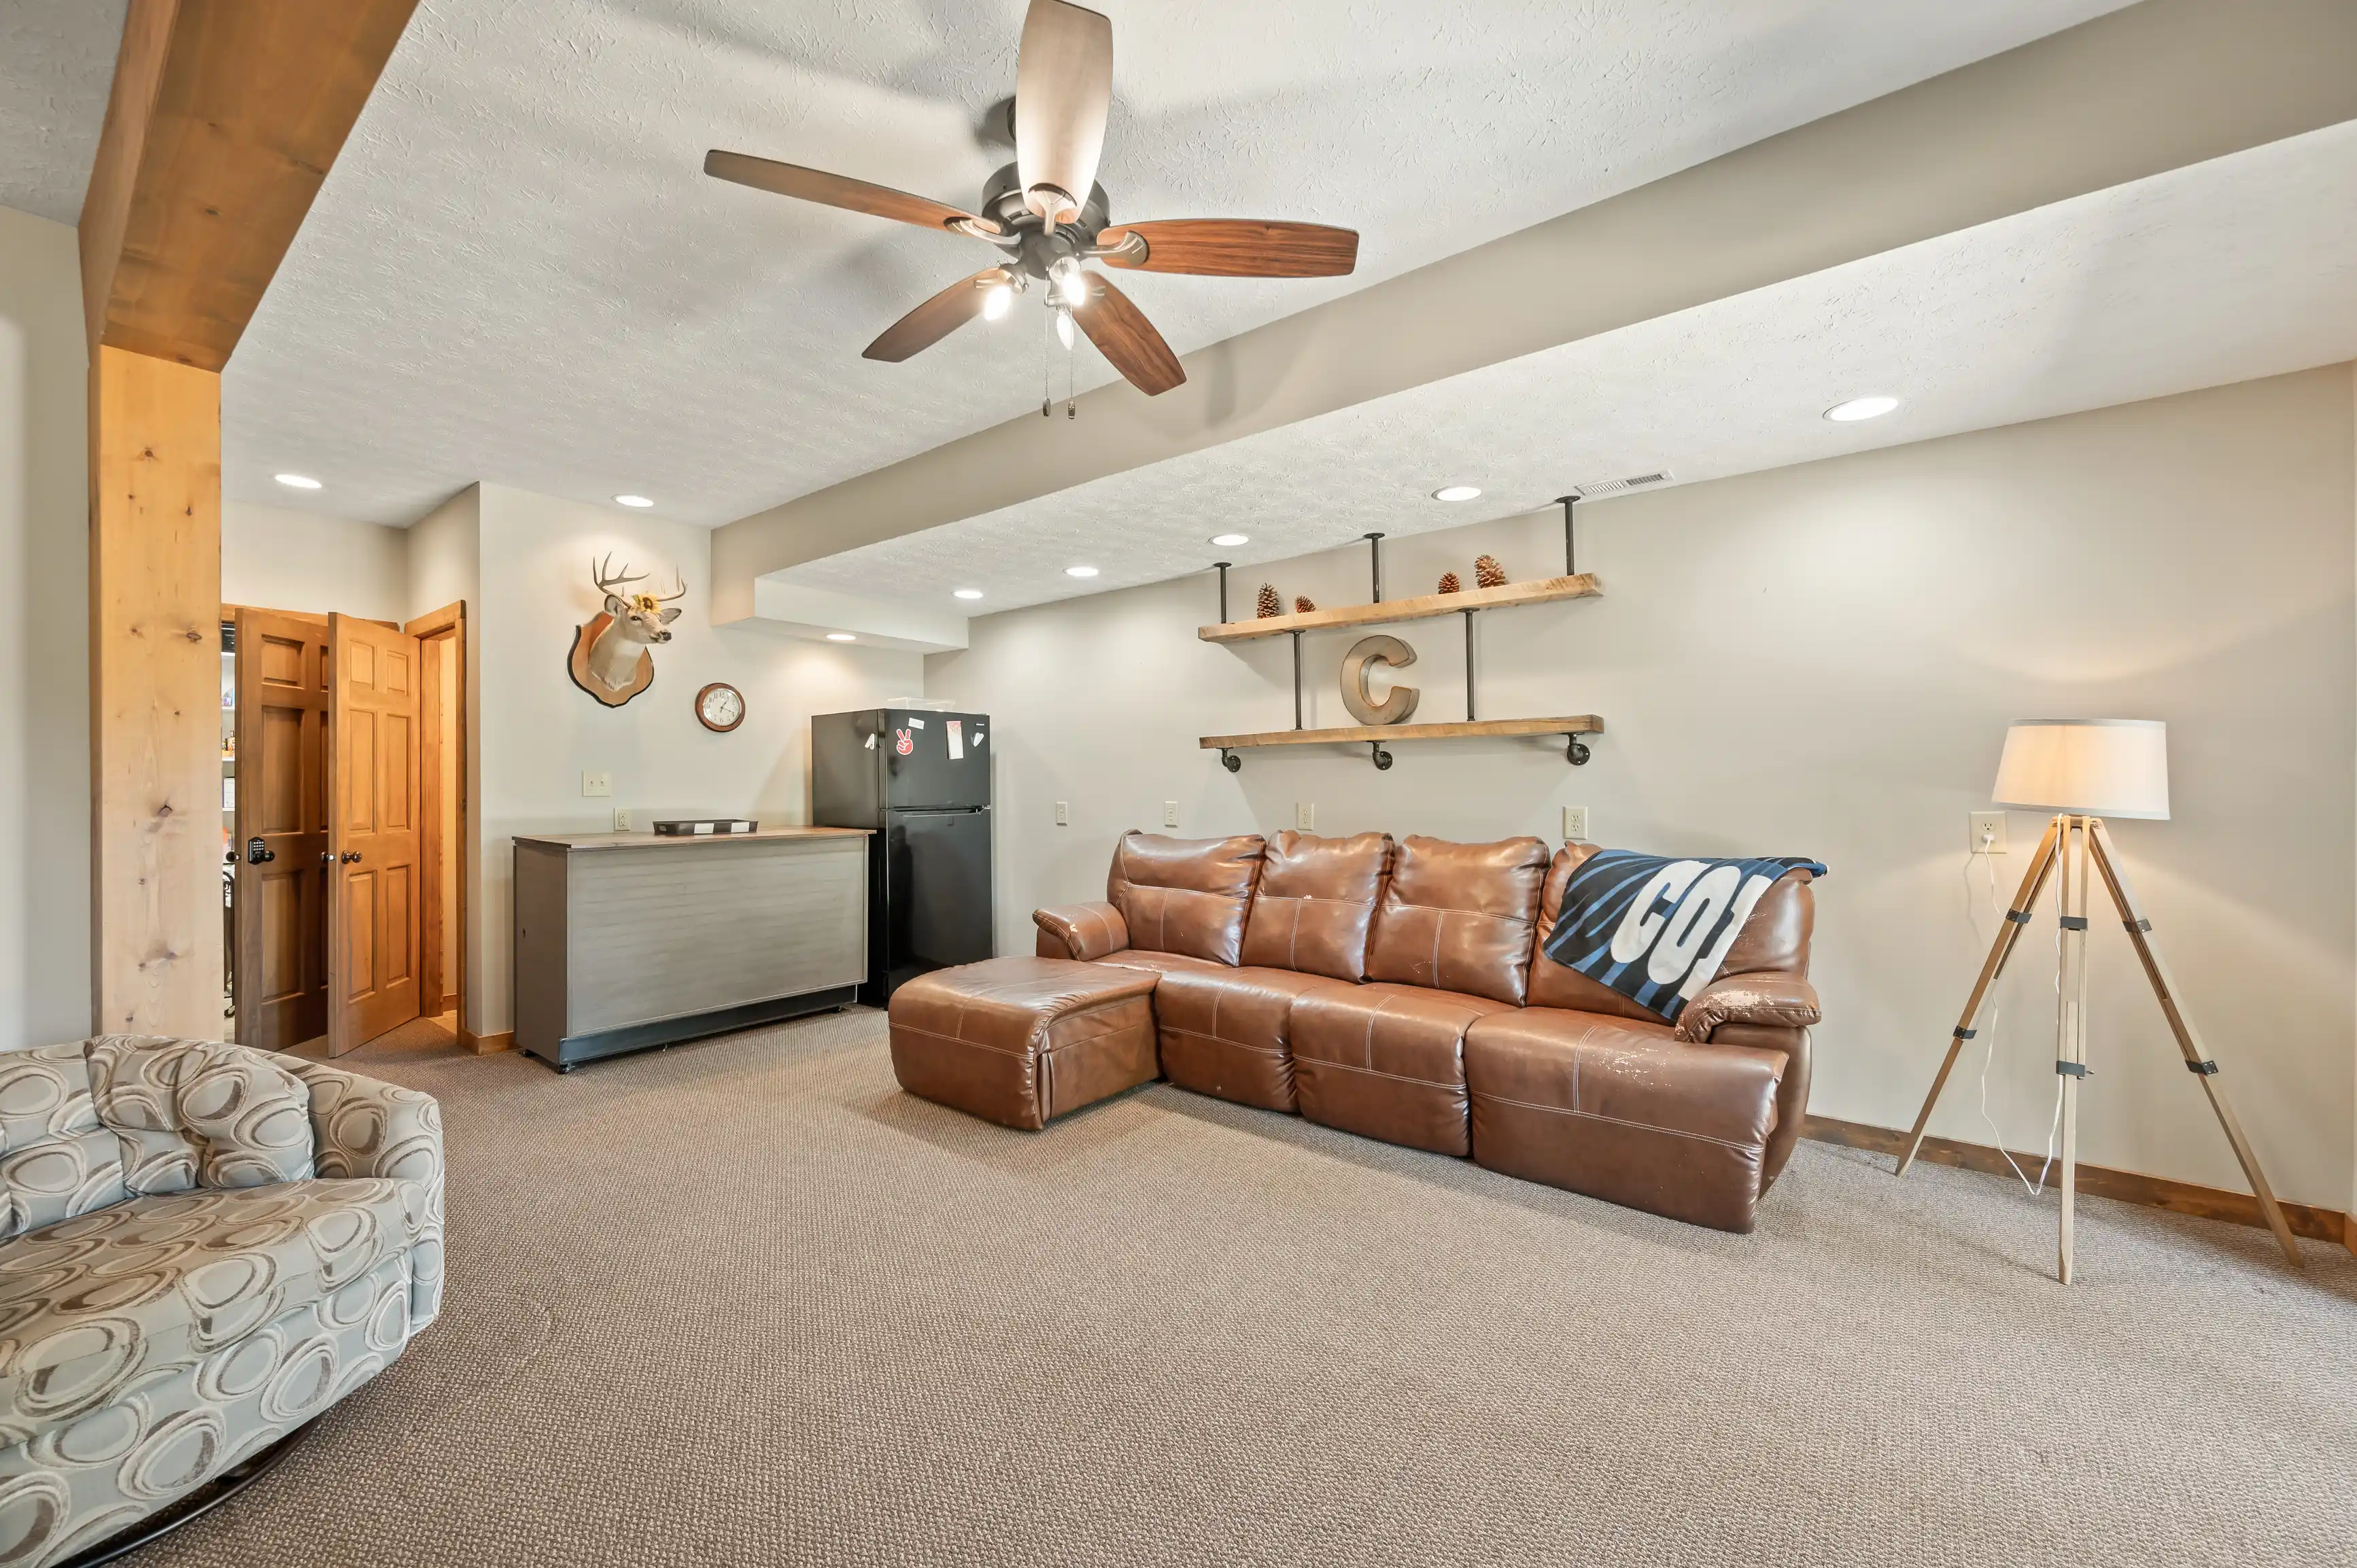 Spacious living room with textured ceiling and fan, leather sectional sofa, tripod floor lamp, floating wooden shelves, deer head wall mount, and a kitchenette with modern appliances in the background.